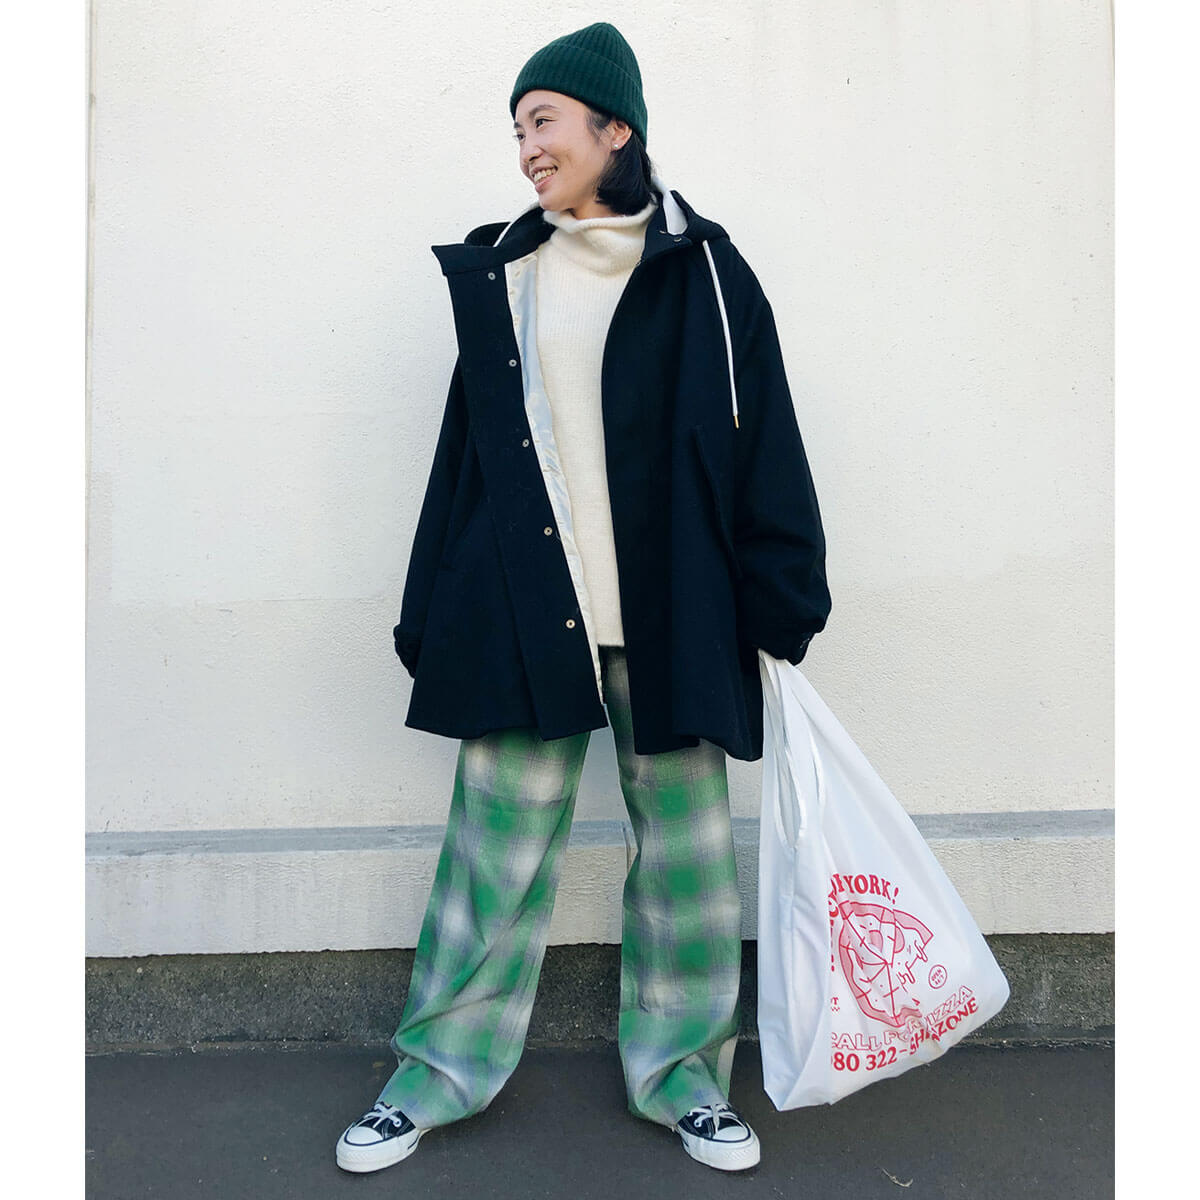 SNAPモデル太田麻未さん　Outer:THE SHINZONE Tops:THE SHINZONE Pants:THE SHINZONE Bag:BAGGU Shoes:CONVERSE